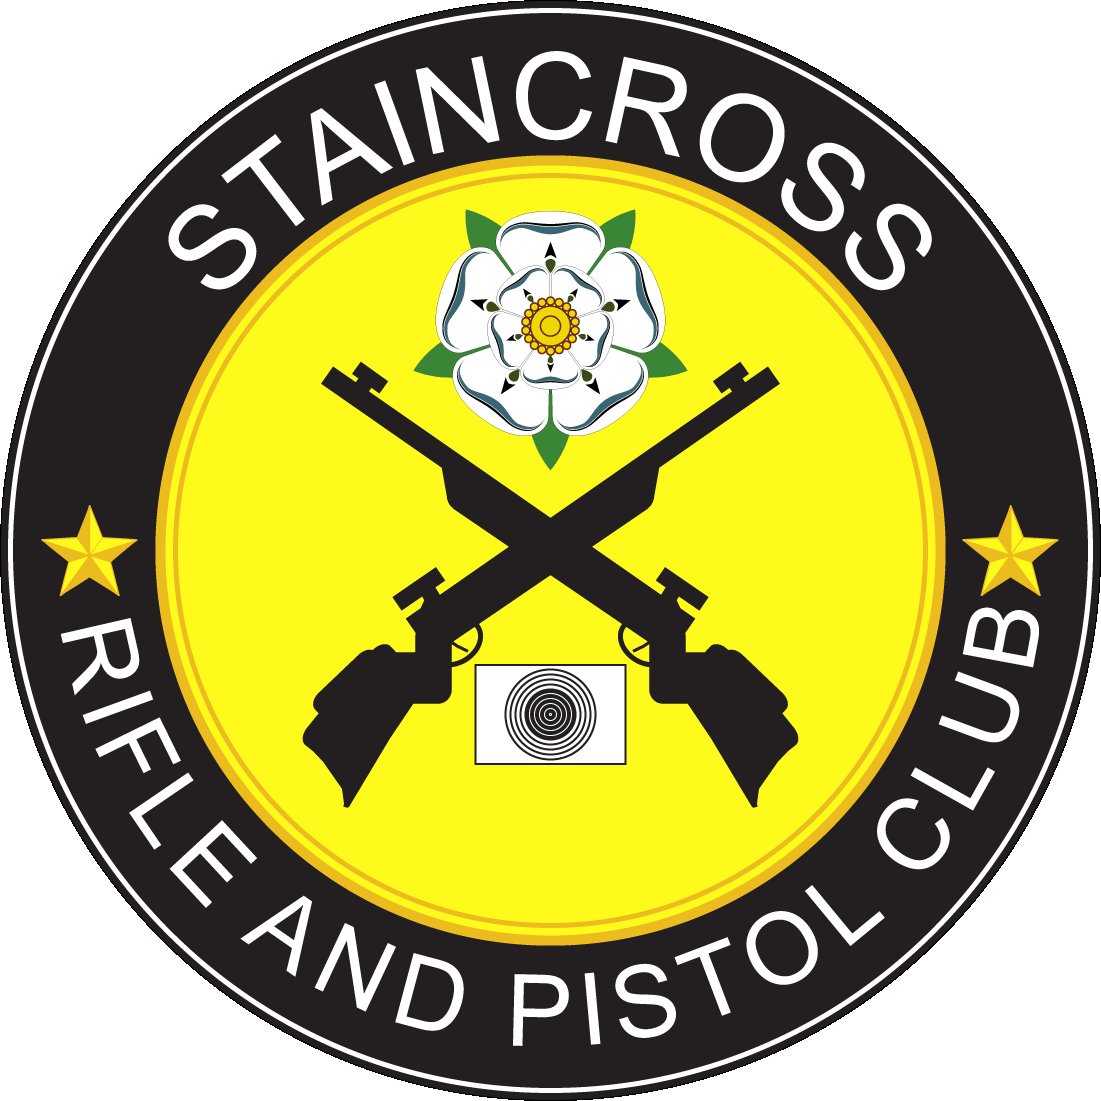 STAINCROSS RIFLE AND PISTOL CLUB